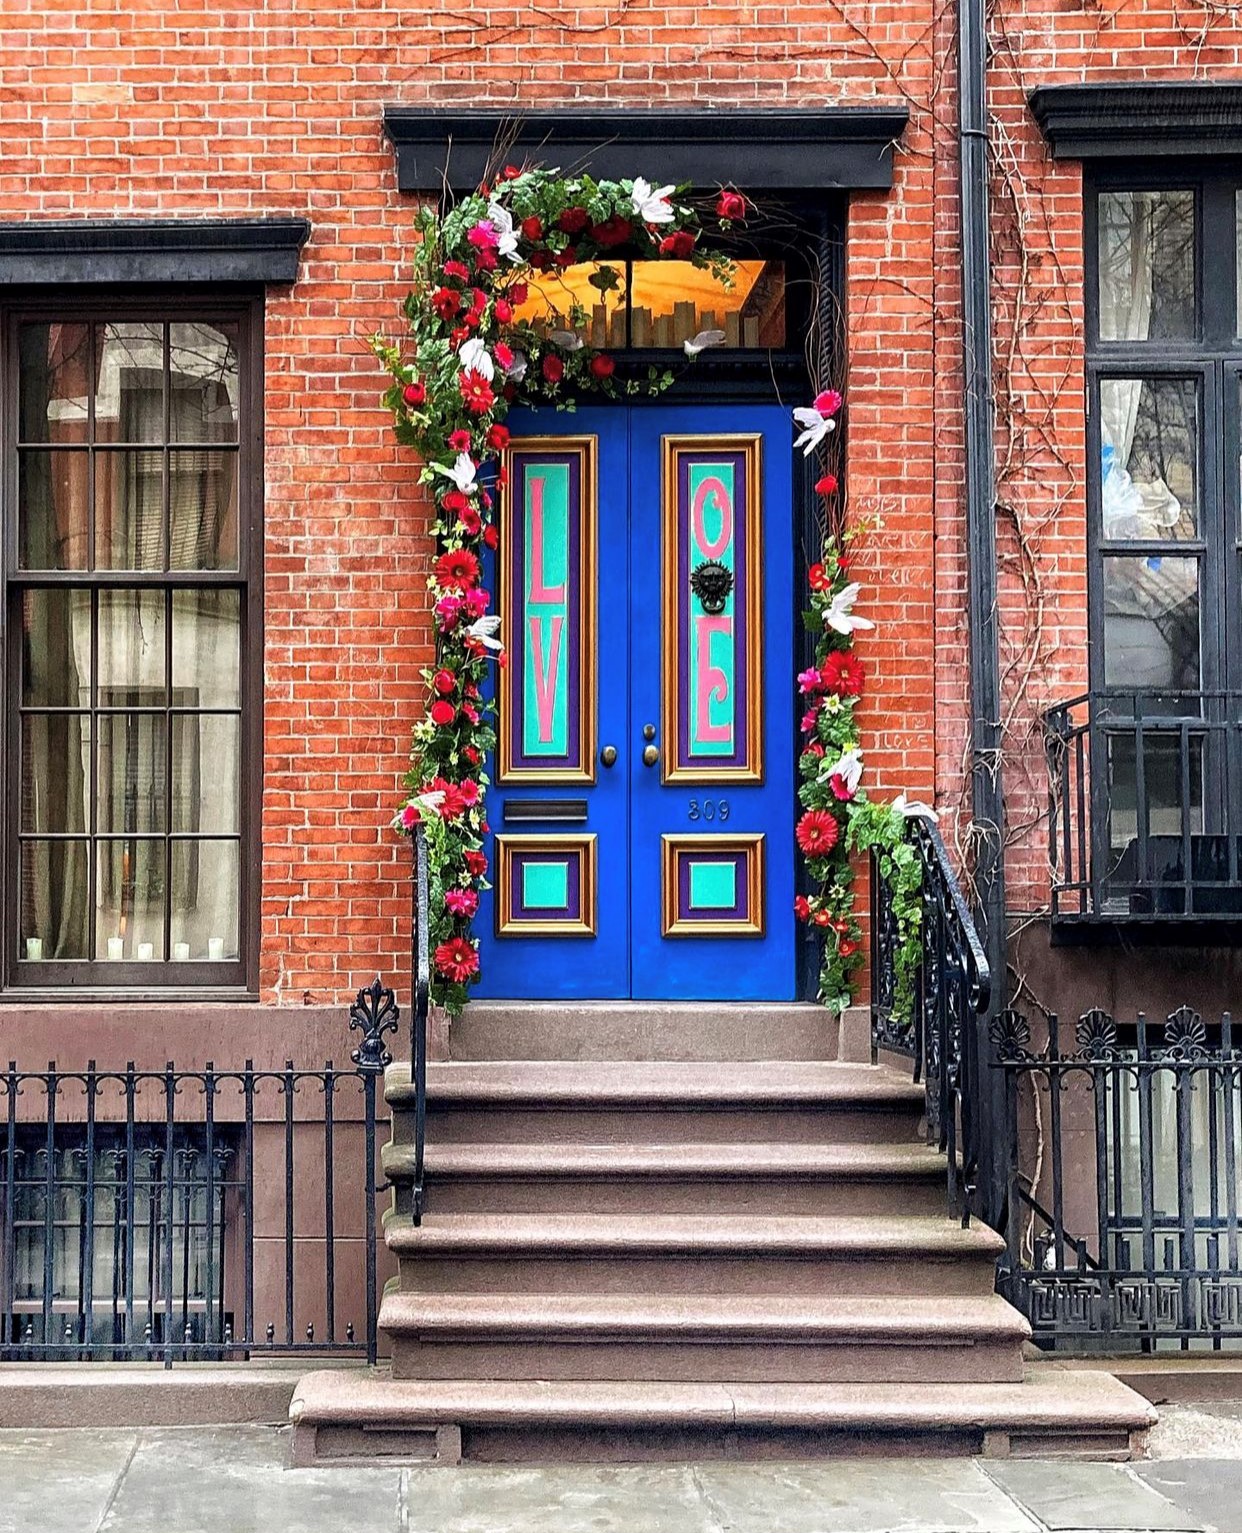 Bright and colorful front doors in the city